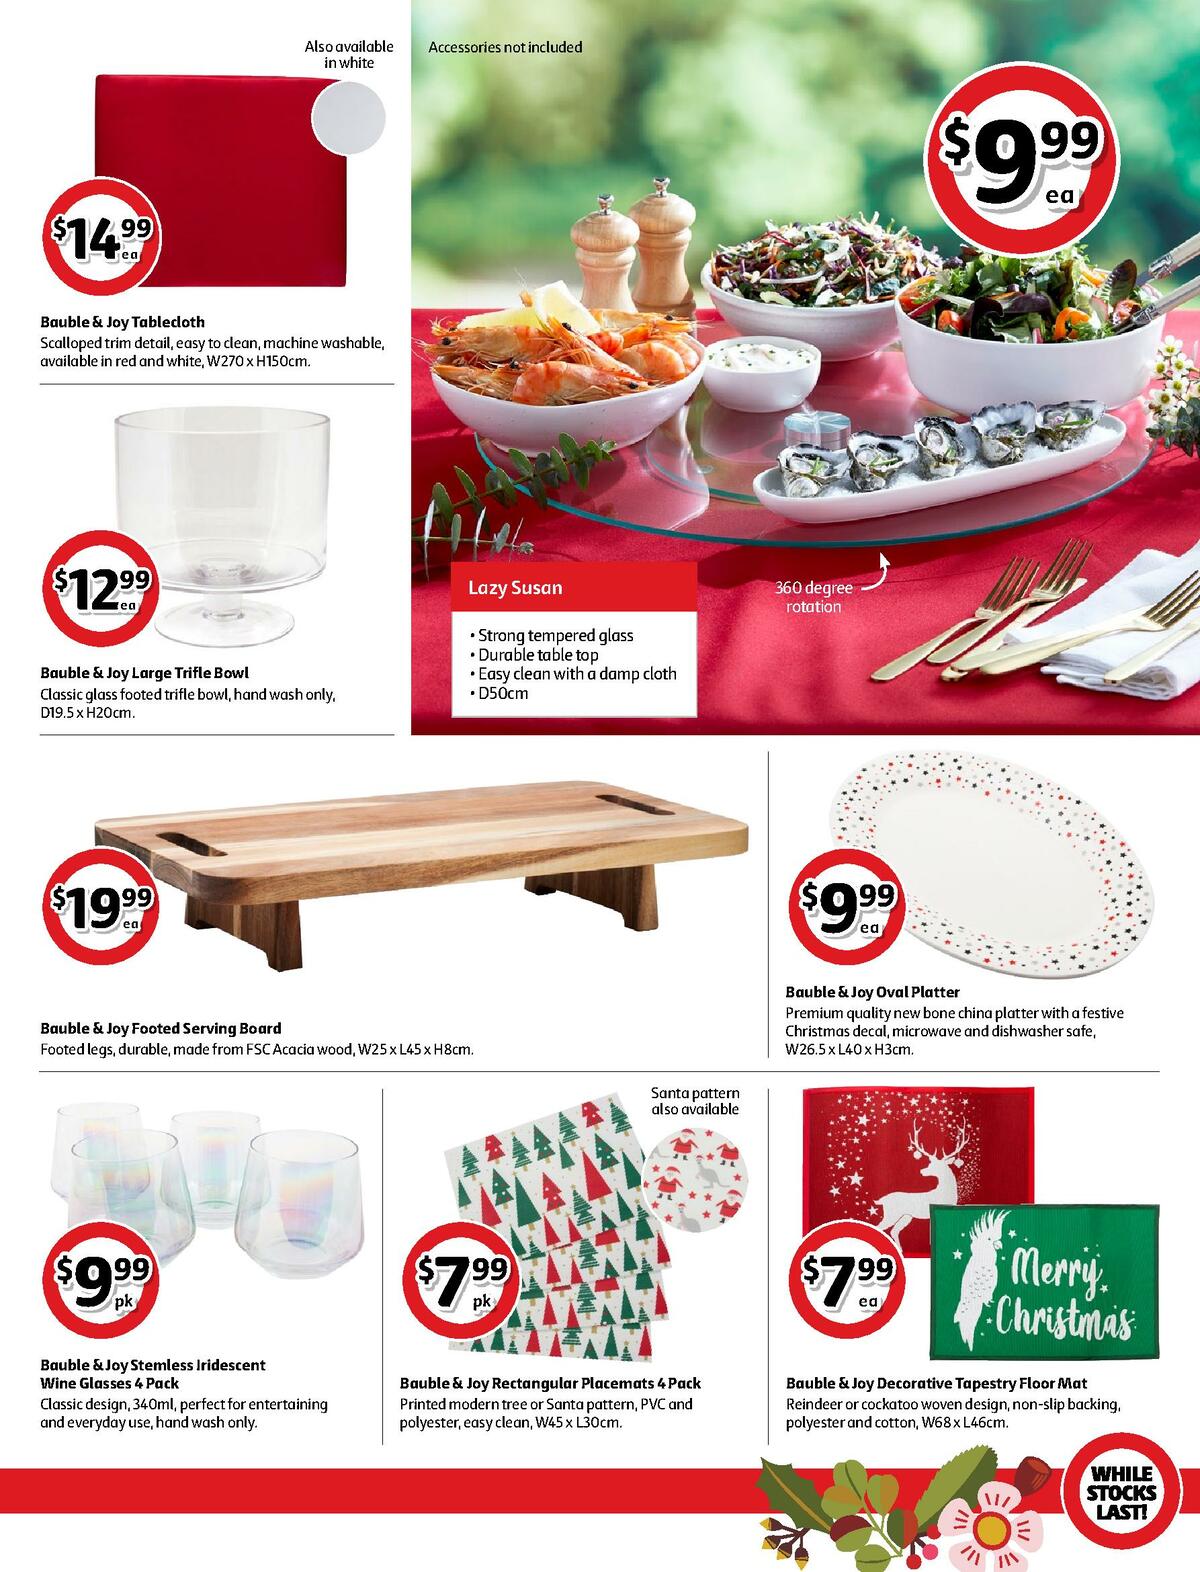 Coles Best Buys - Christmas Entertaining Catalogues from 12 November